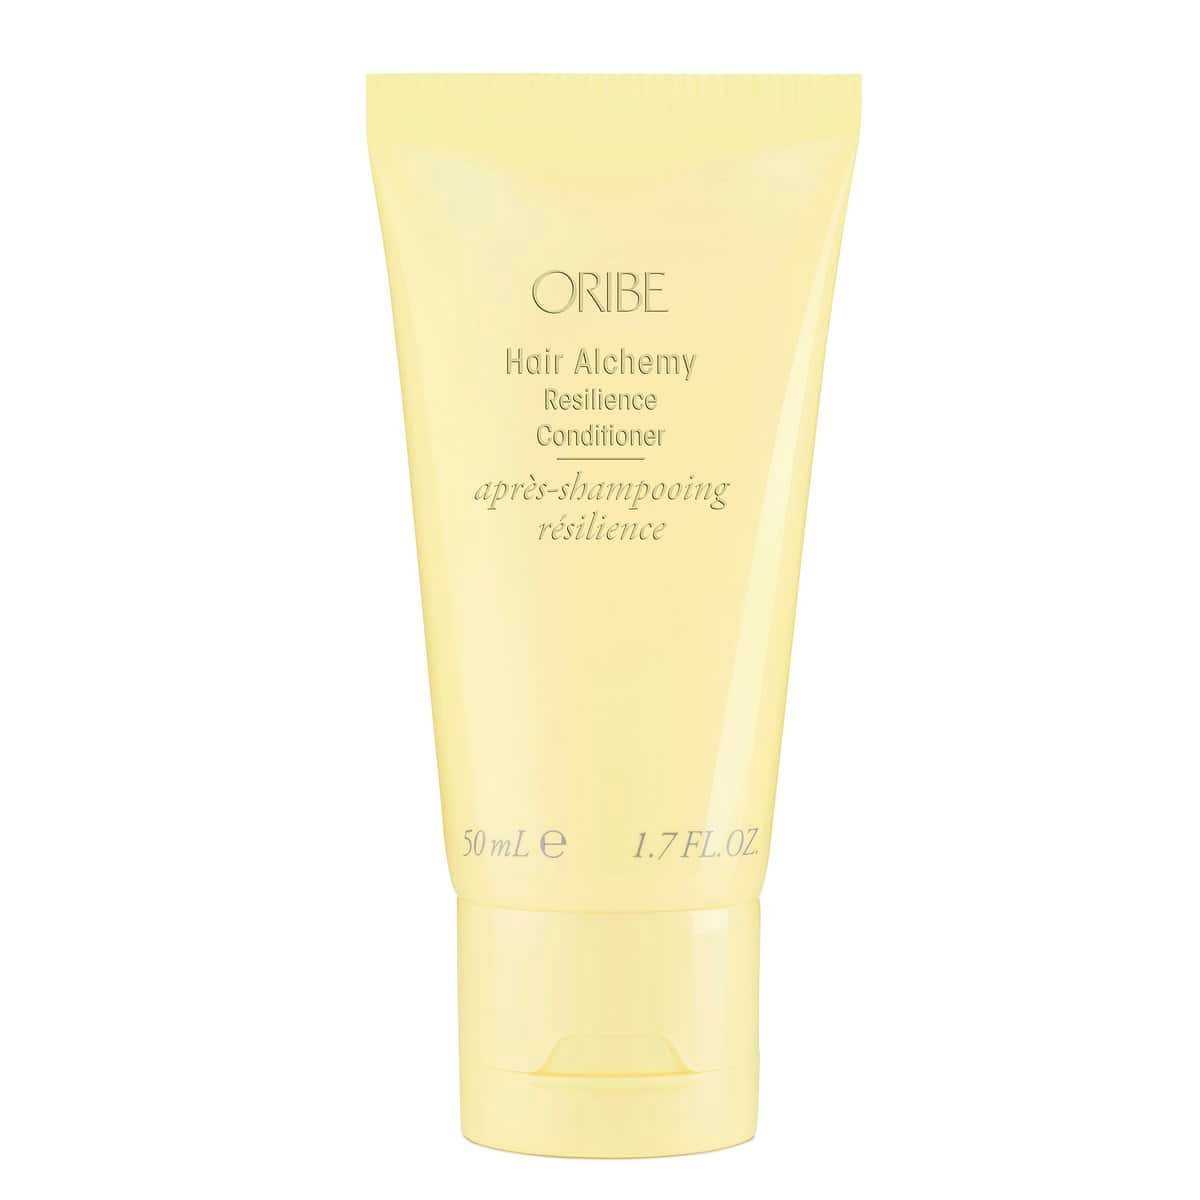 ORIBE Hair Alchemy Resilience Conditioner Travel Size 50 ml